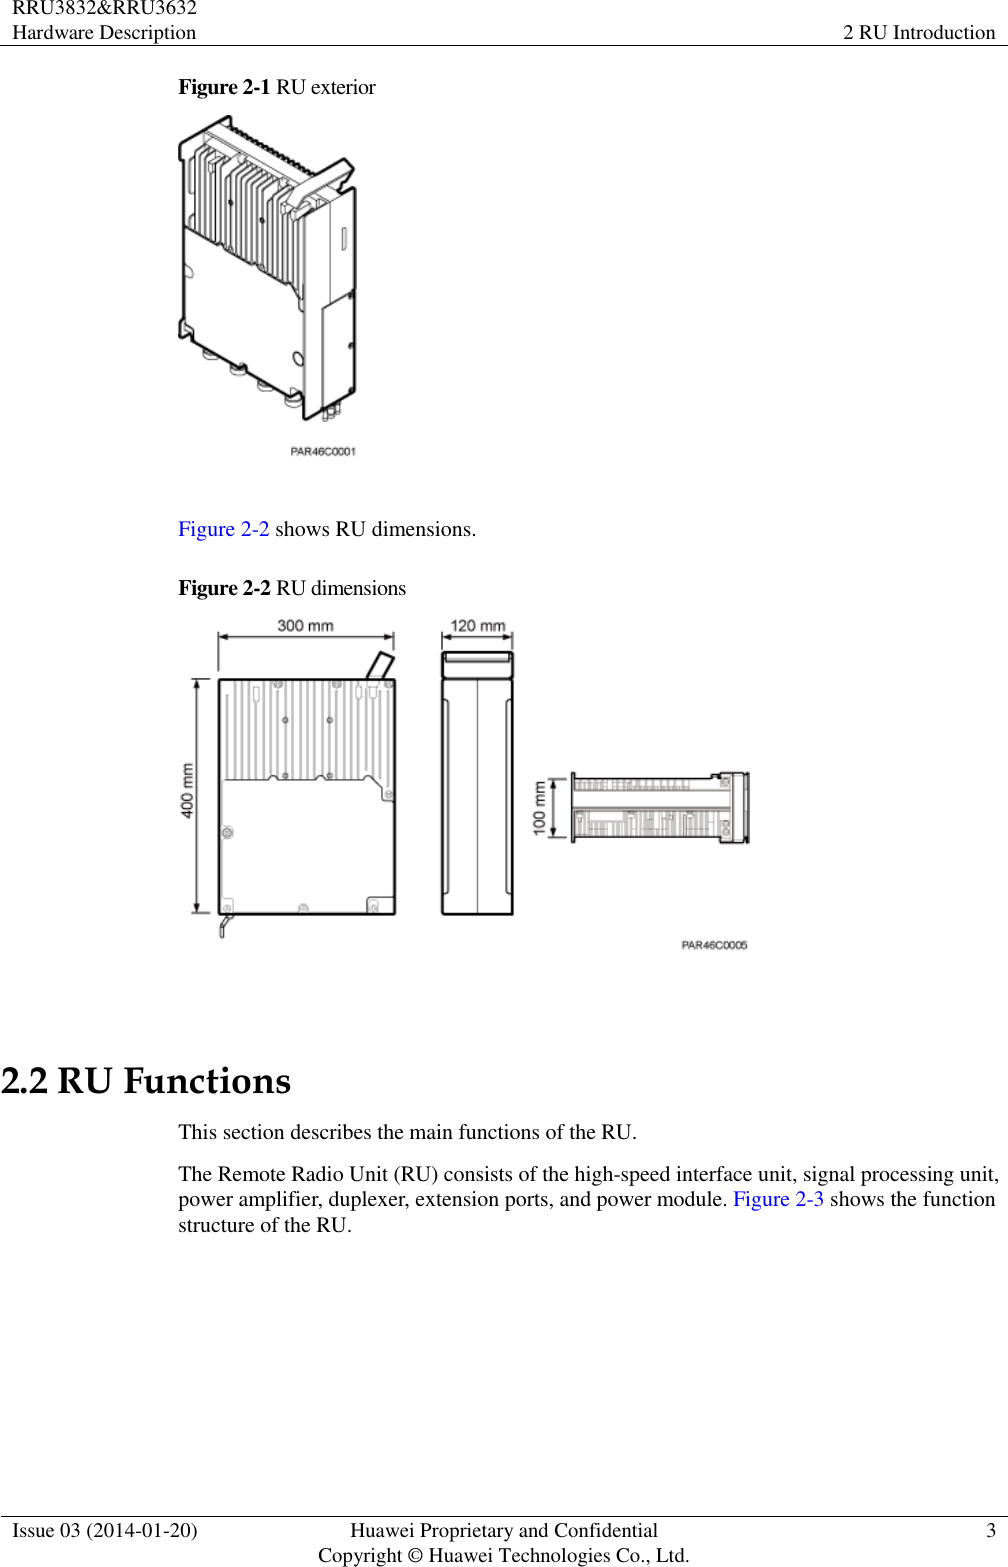 RRU3832&amp;RRU3632 Hardware Description 2 RU Introduction  Issue 03 (2014-01-20) Huawei Proprietary and Confidential                                     Copyright © Huawei Technologies Co., Ltd. 3  Figure 2-1 RU exterior   Figure 2-2 shows RU dimensions. Figure 2-2 RU dimensions   2.2 RU Functions This section describes the main functions of the RU. The Remote Radio Unit (RU) consists of the high-speed interface unit, signal processing unit, power amplifier, duplexer, extension ports, and power module. Figure 2-3 shows the function structure of the RU. 